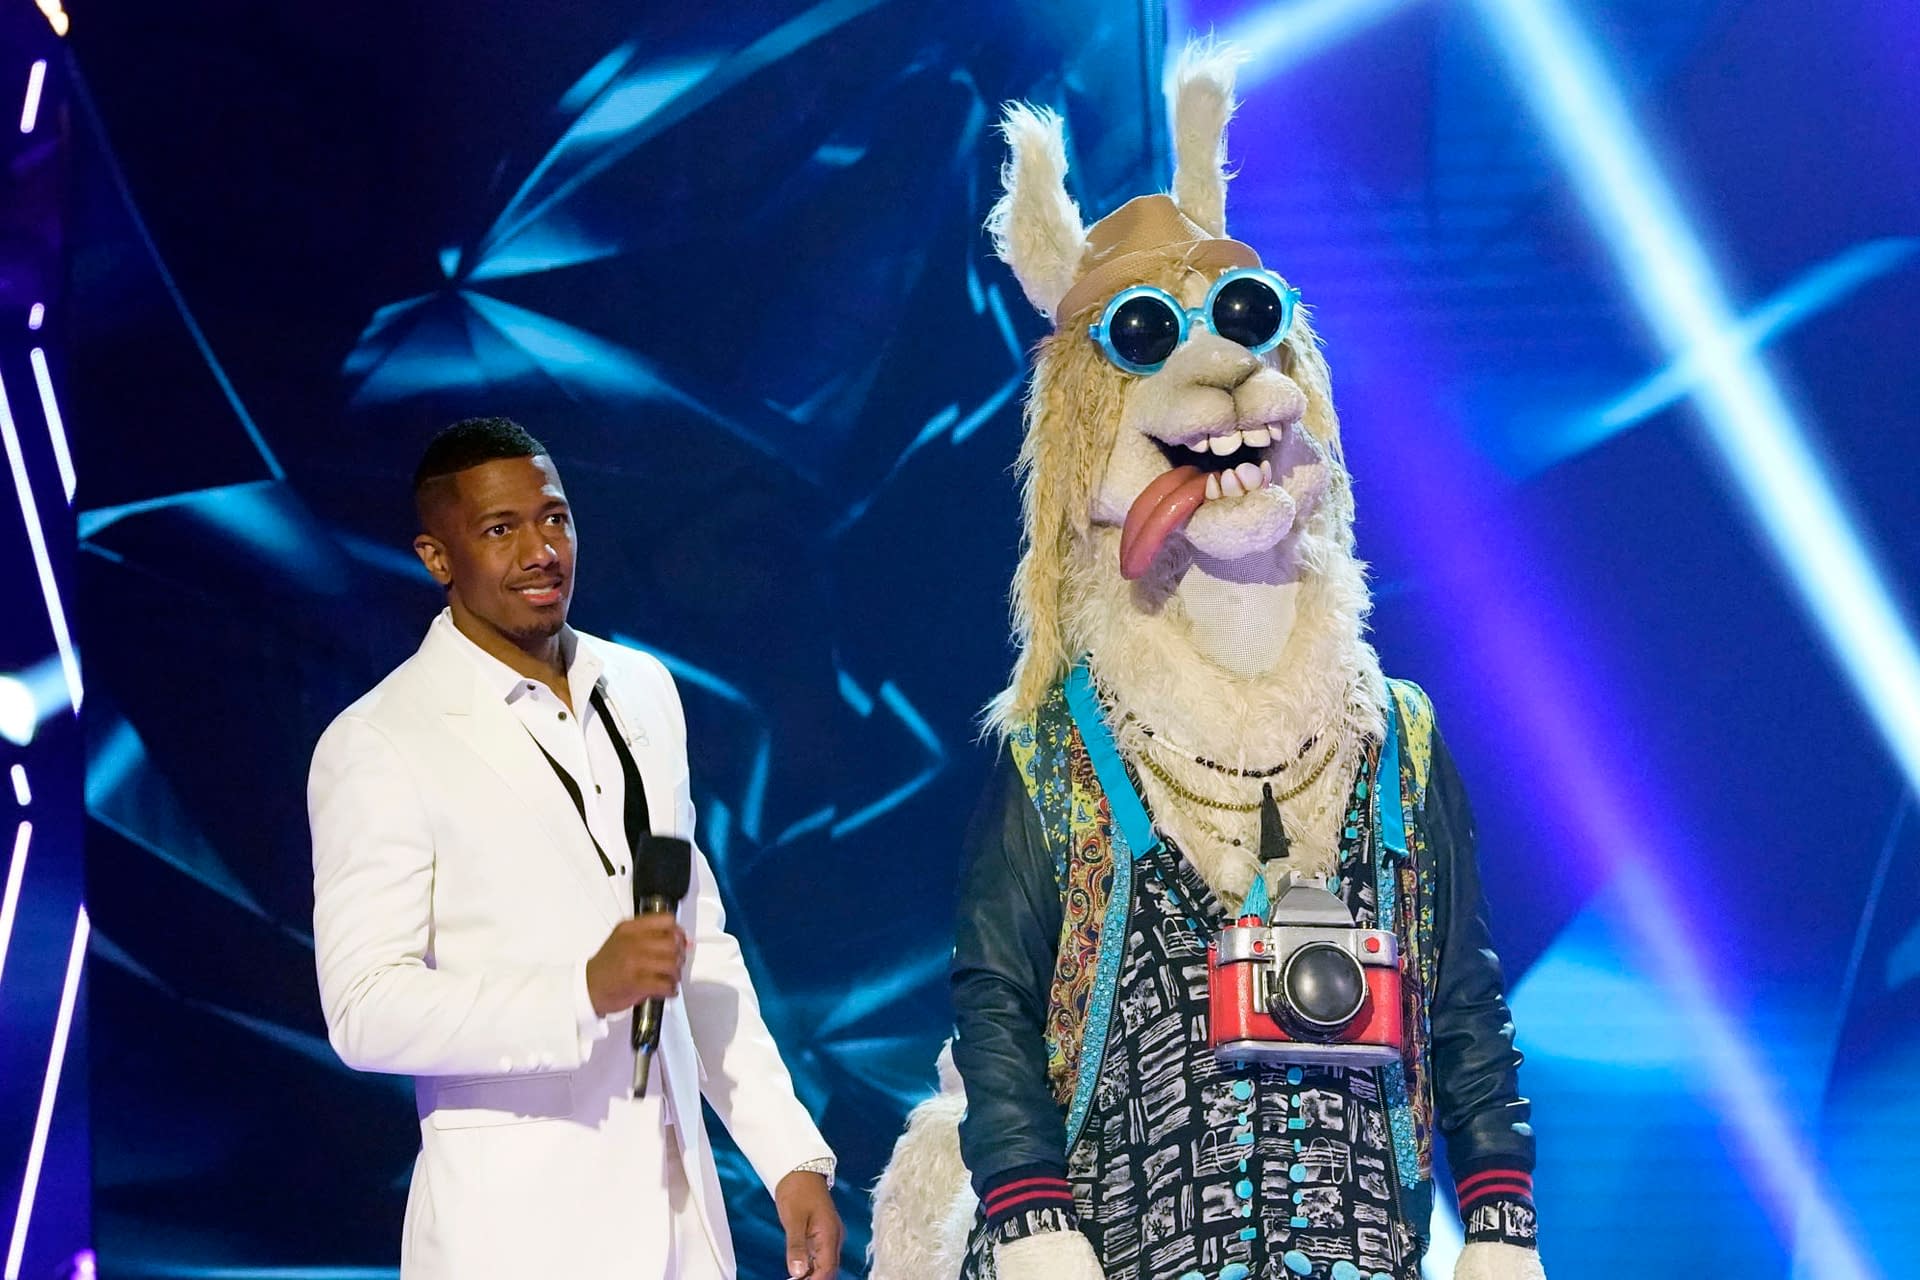 "The Masked Singer" Season 3 Means Business in New Preview/Clue Clips [VIDEO]